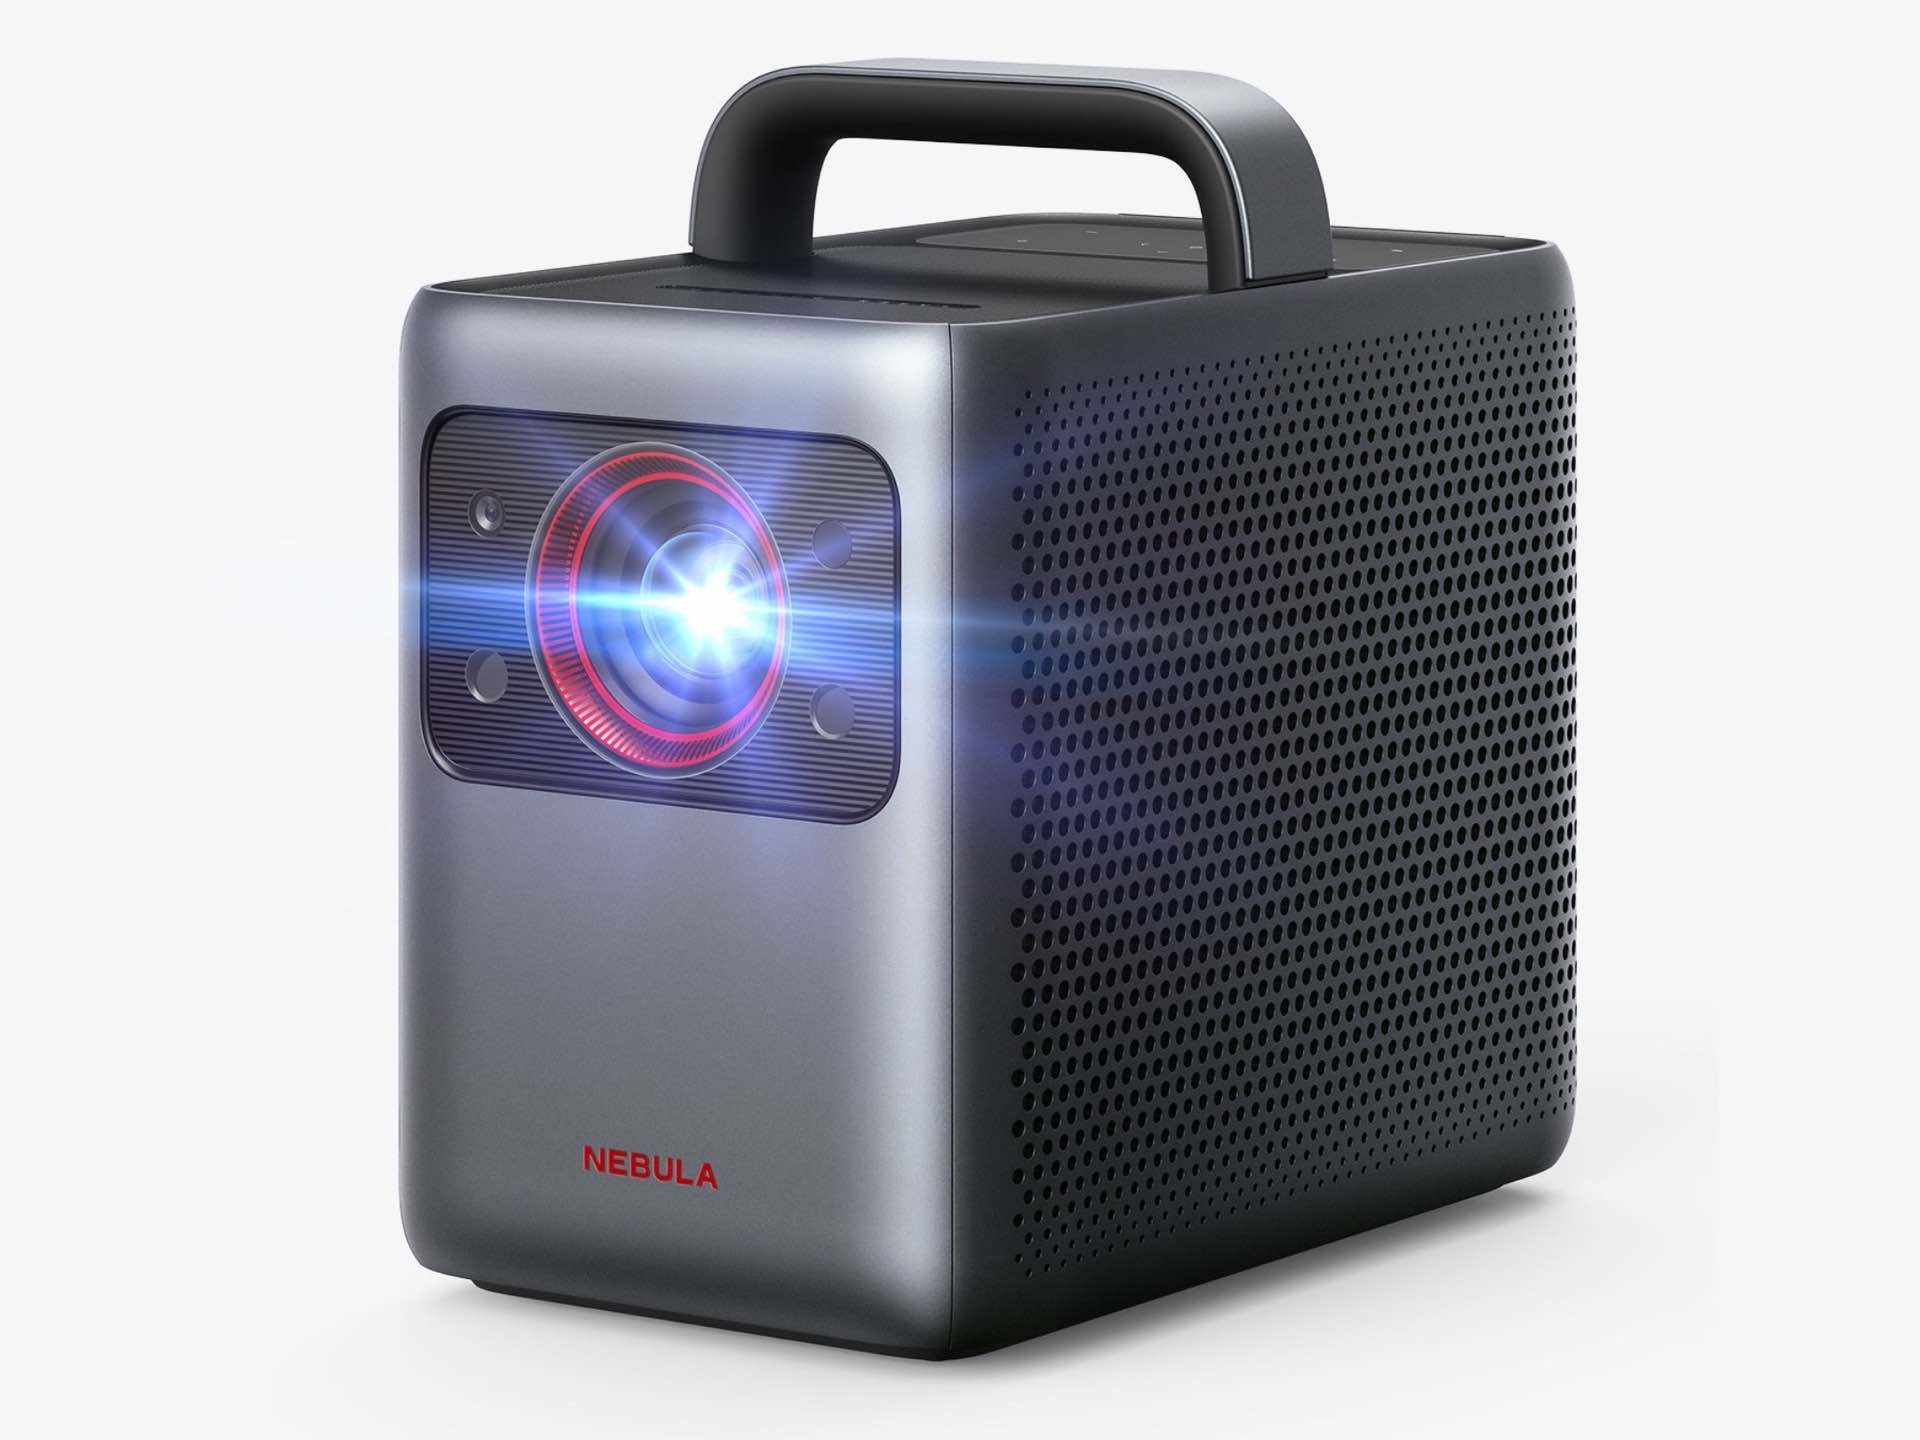 Anker NEBULA “Cosmos Laser” home theater projectors. ($1,100 for 1080p model, $1,600 for 4K model)